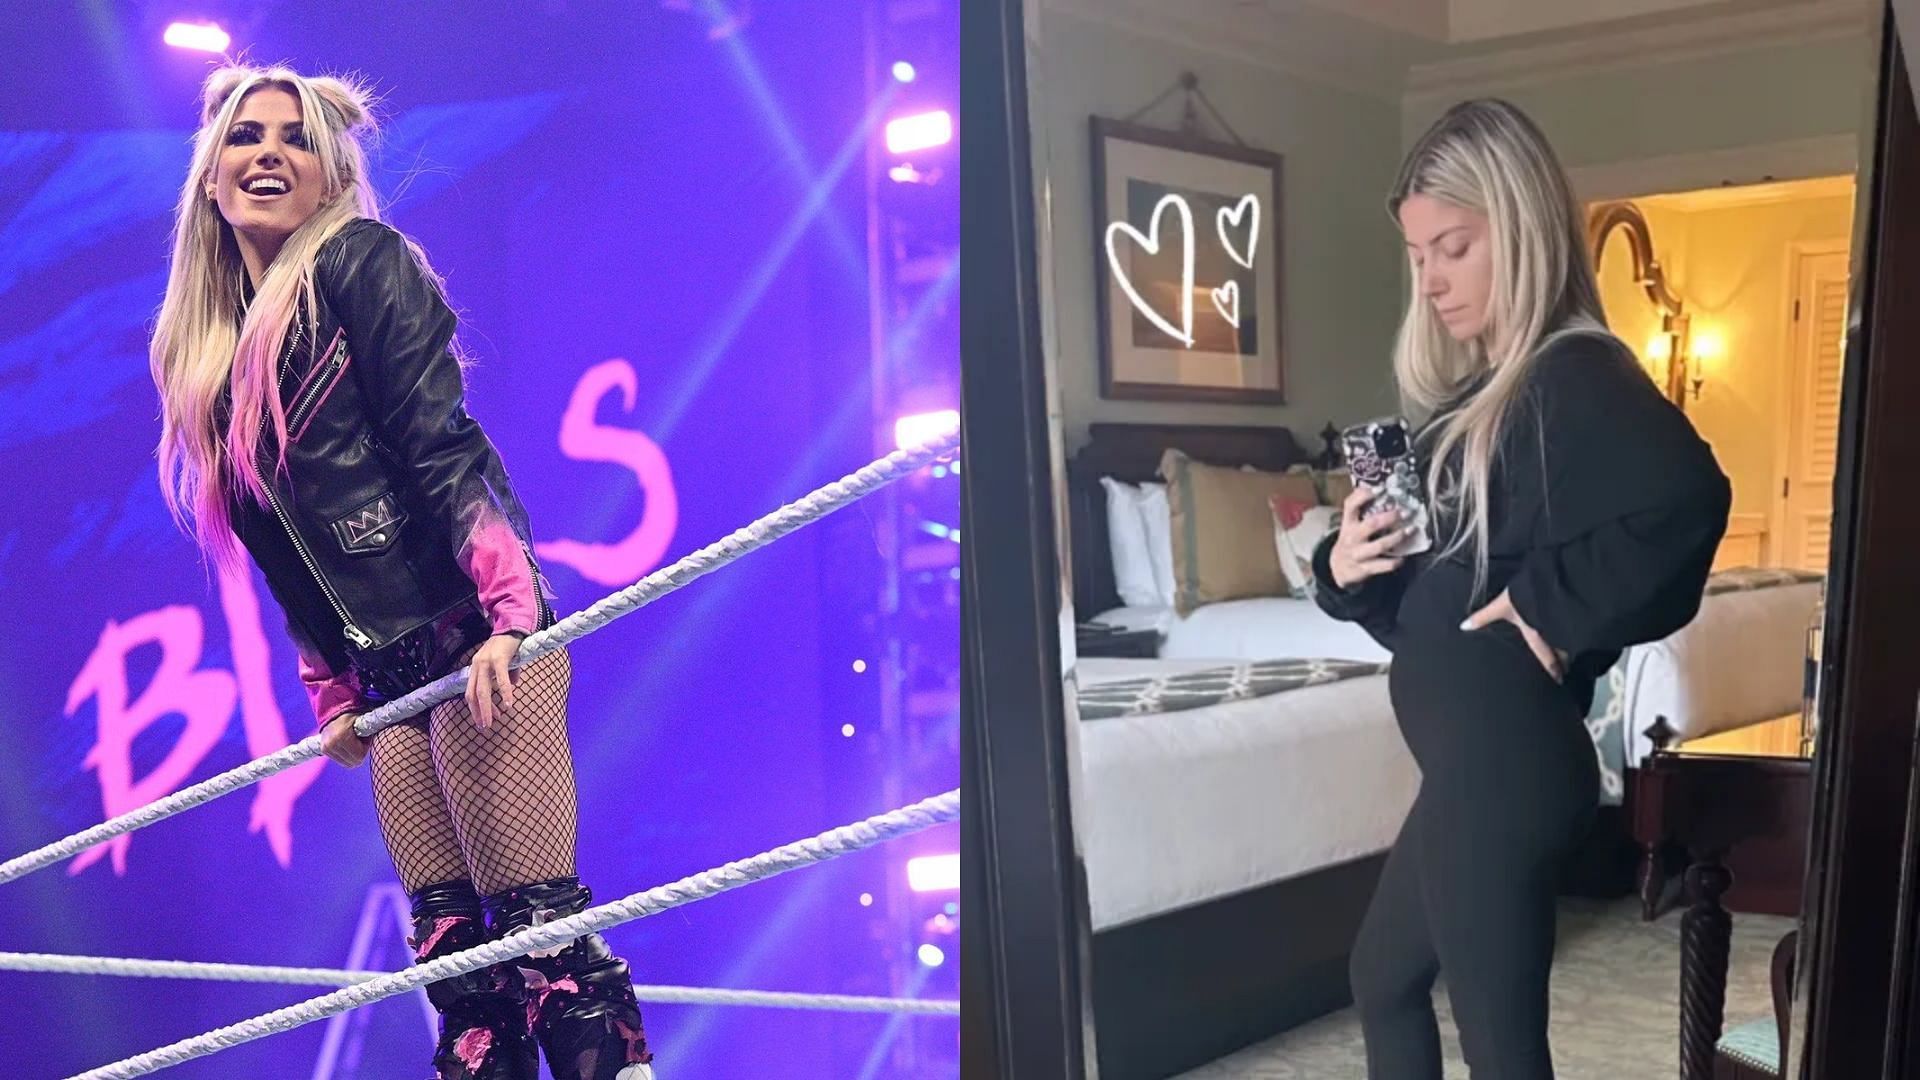 Alexa Bliss is currently on a maternity break